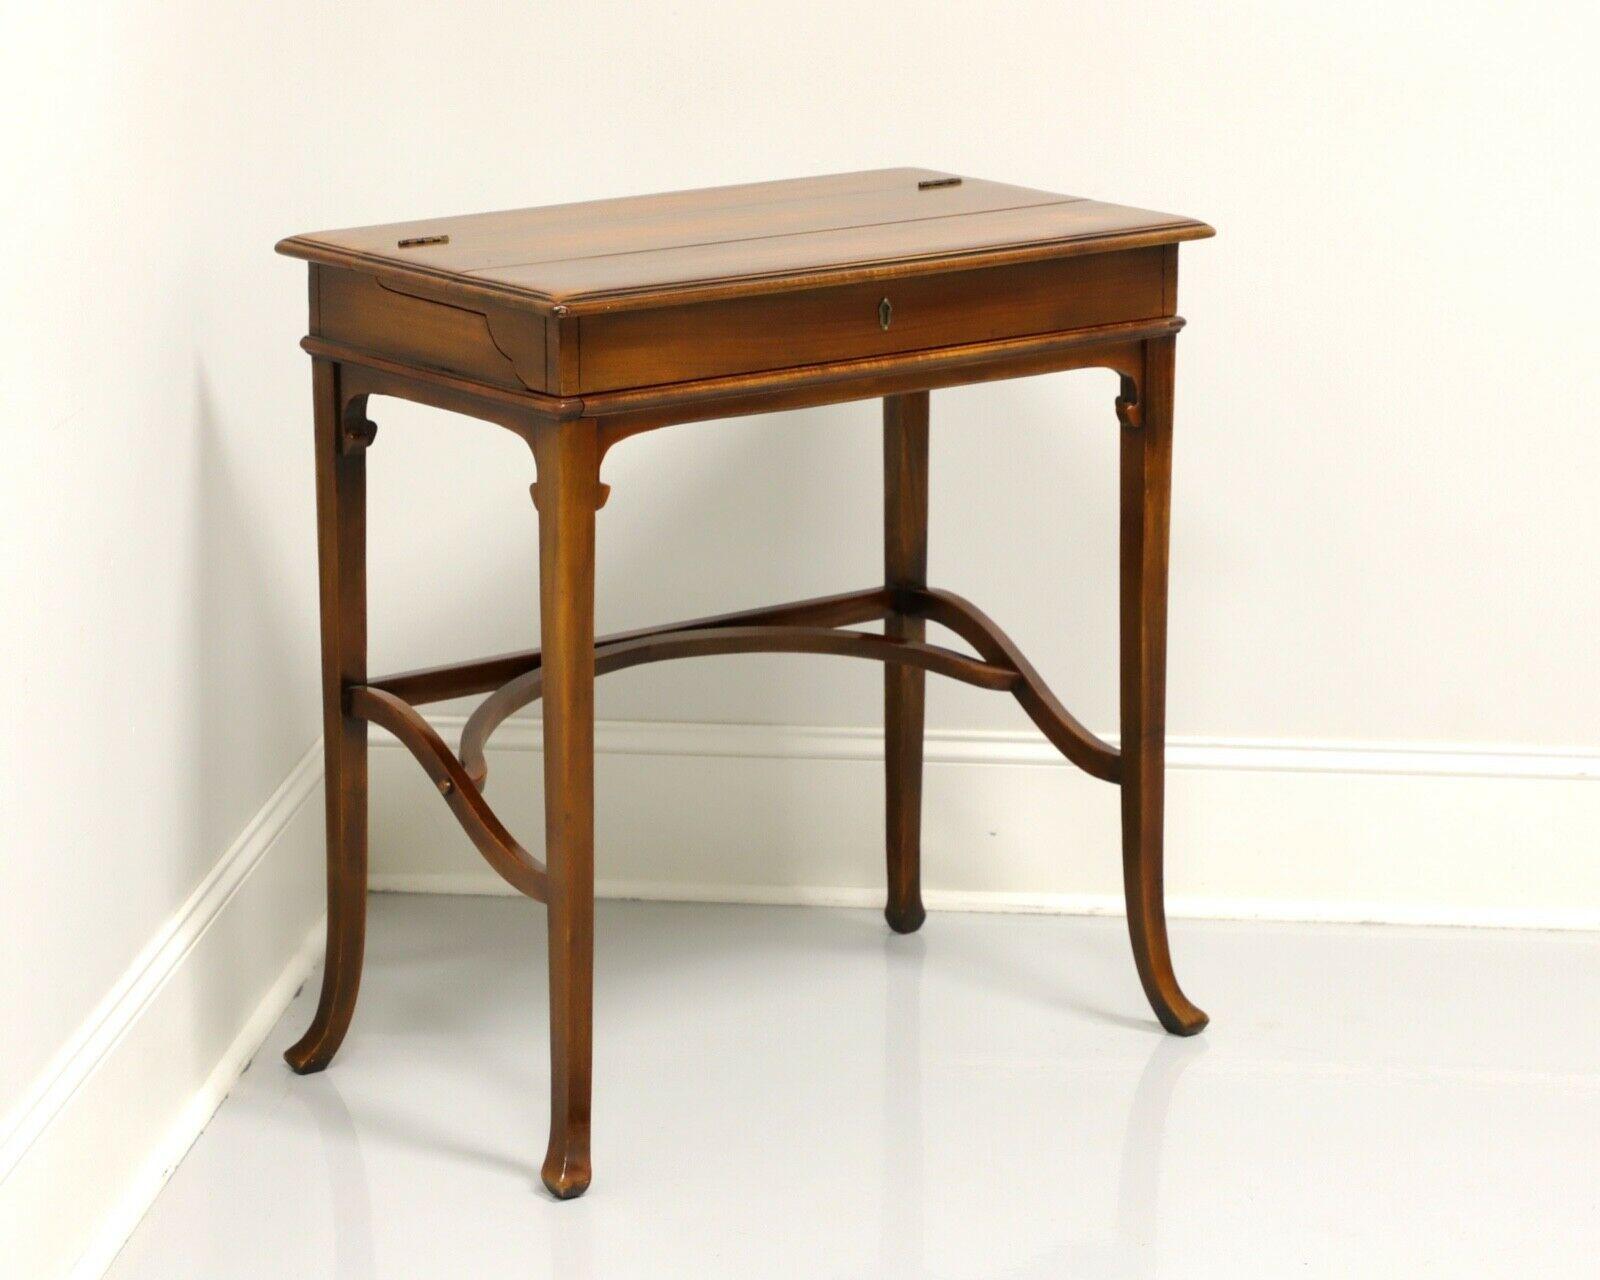 BAKER Petite Victorian Style Campaign Writing Desk 5